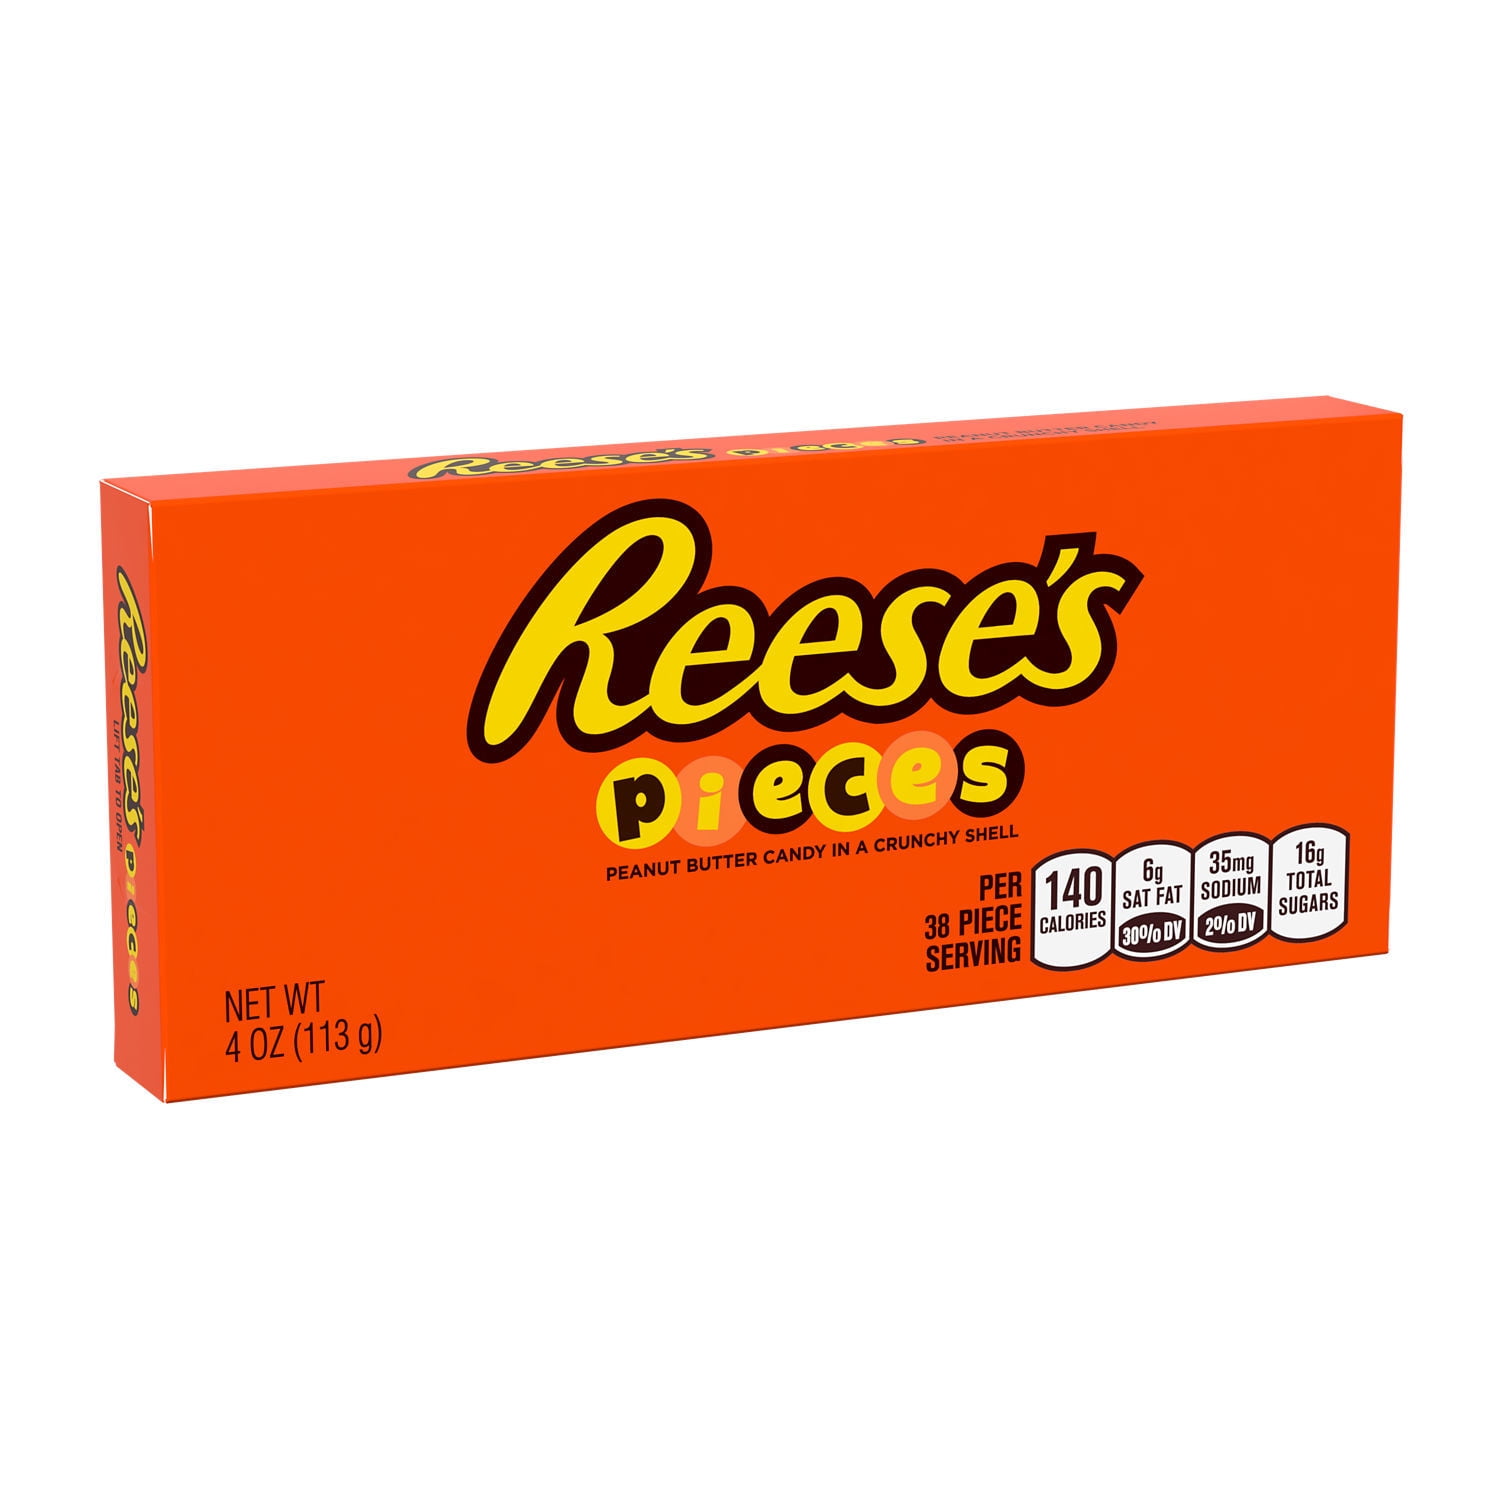 REESE'S PIECES Peanut Butter in a Crunchy Shell, Easter Candy Box, 4 oz